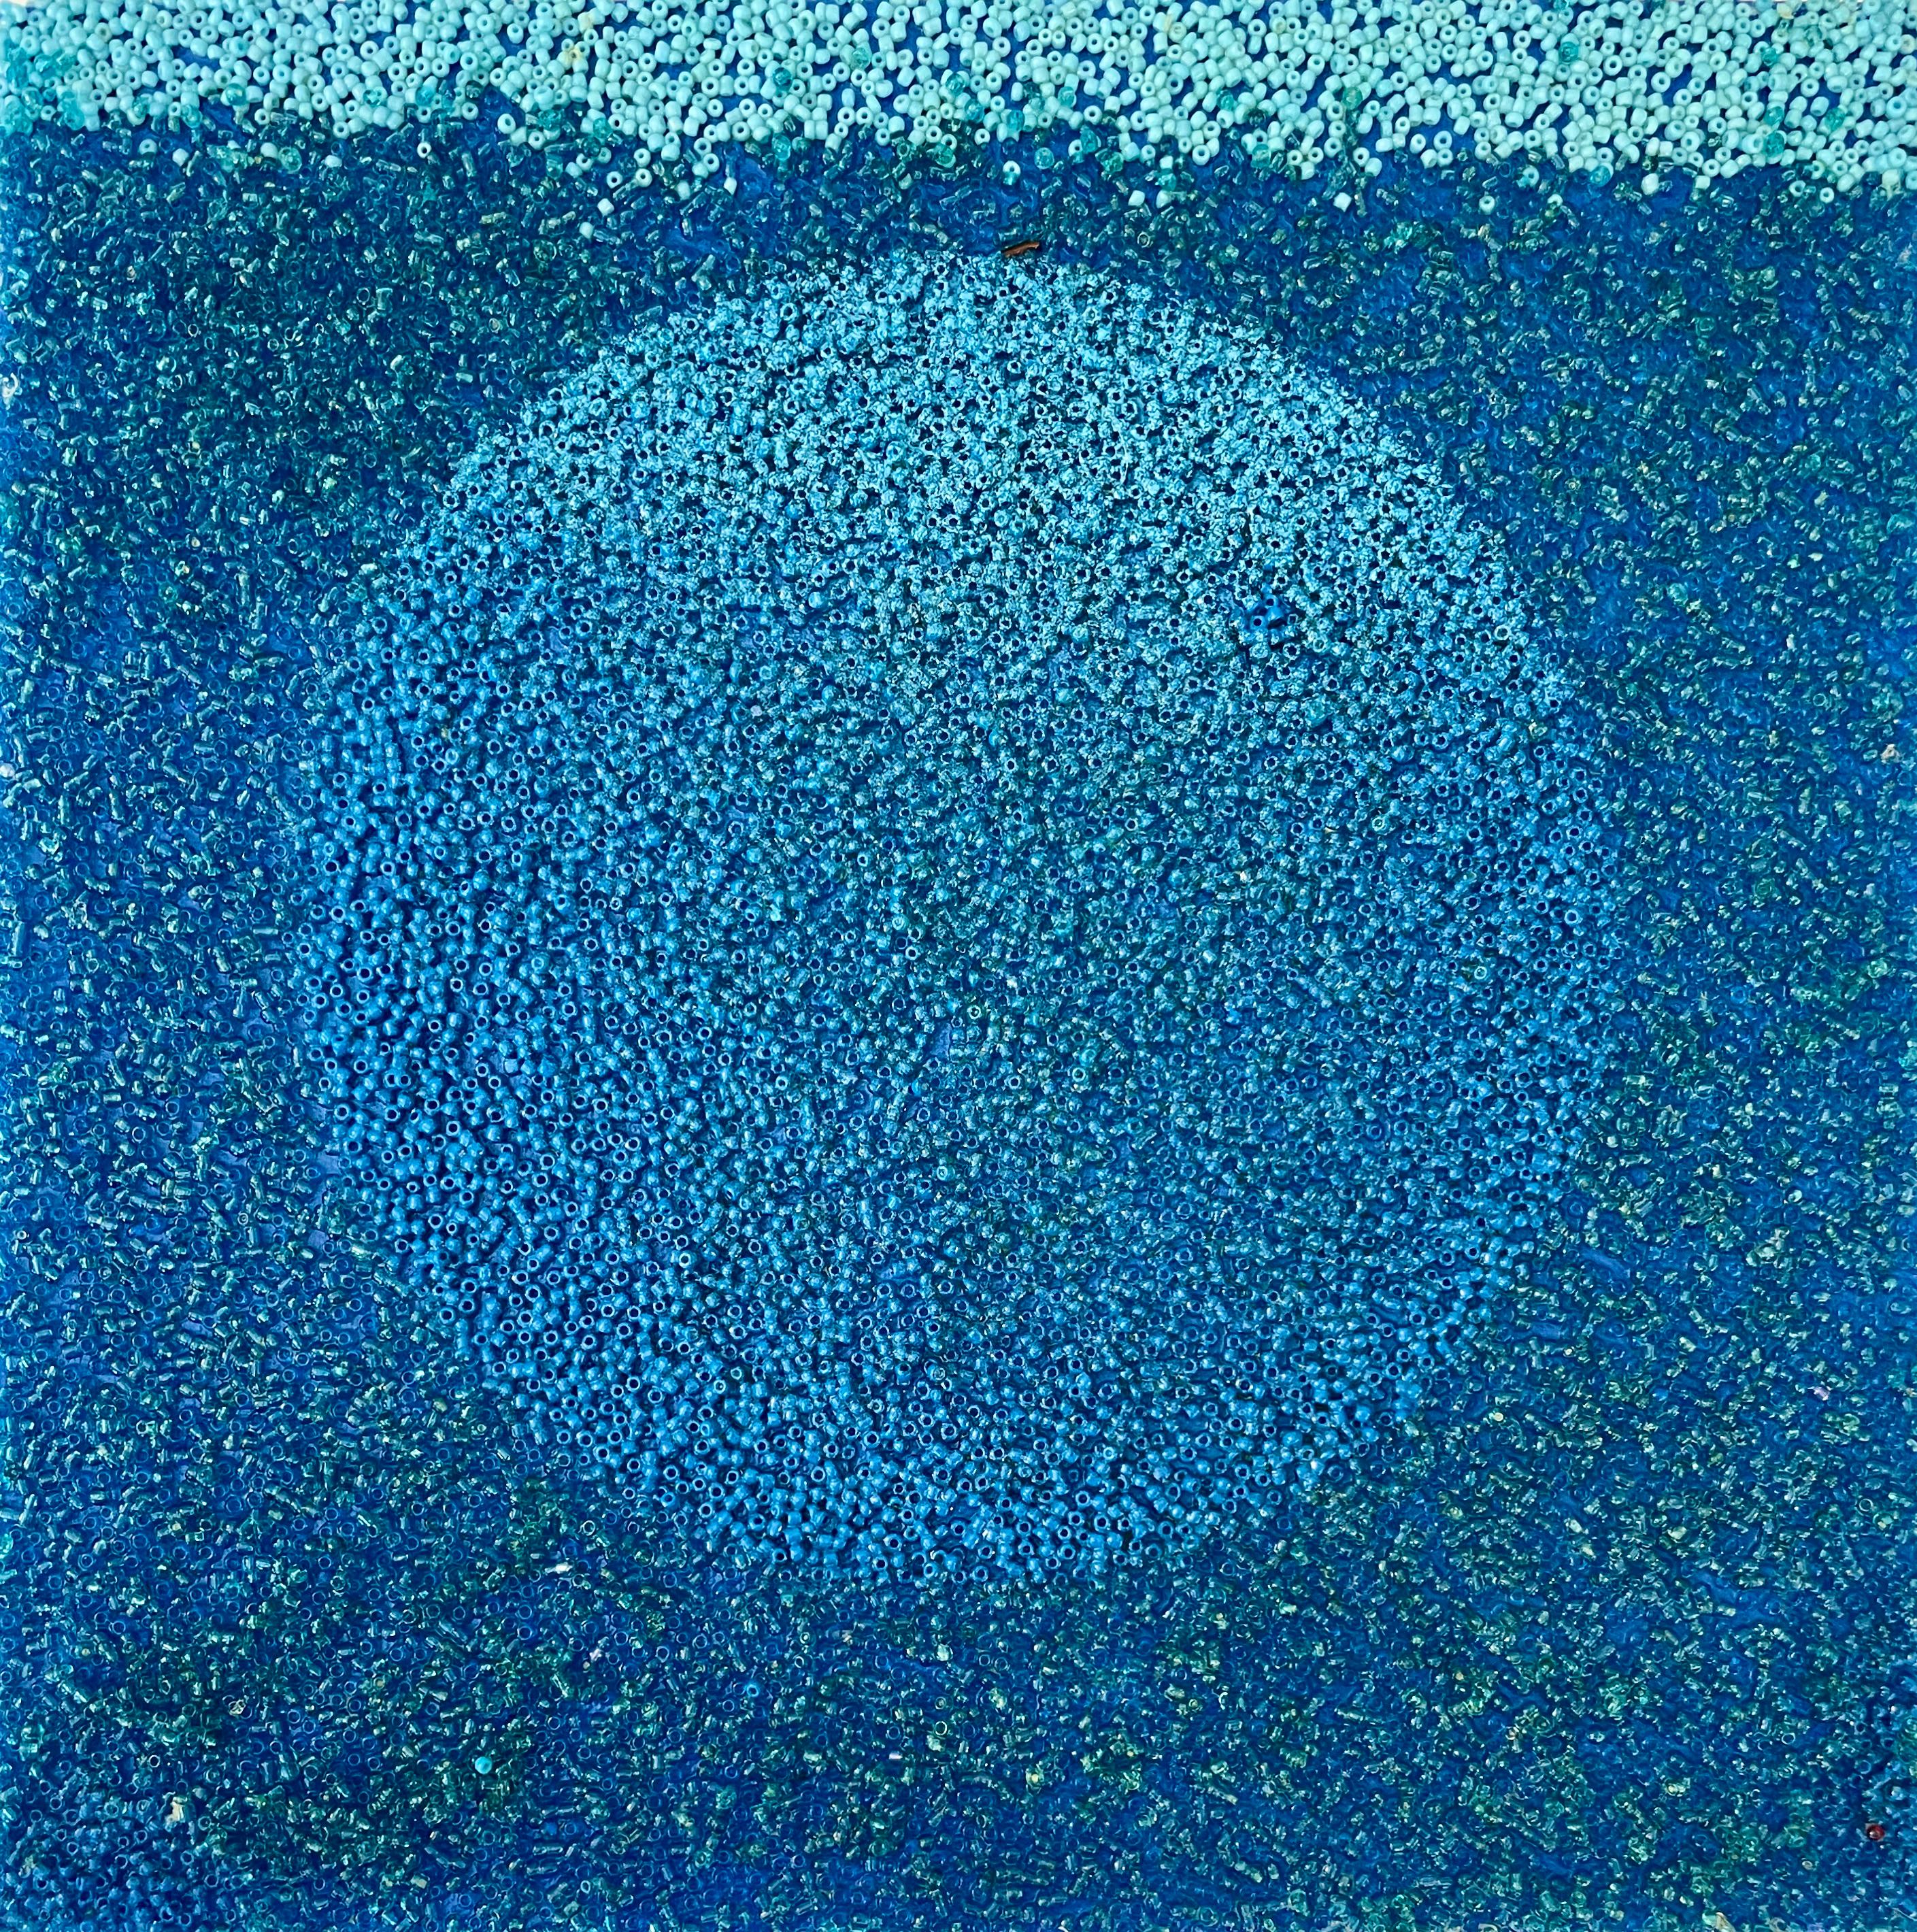 Tantra in Blue #12: minimalist abstract sculpture / painting w/ madala circles